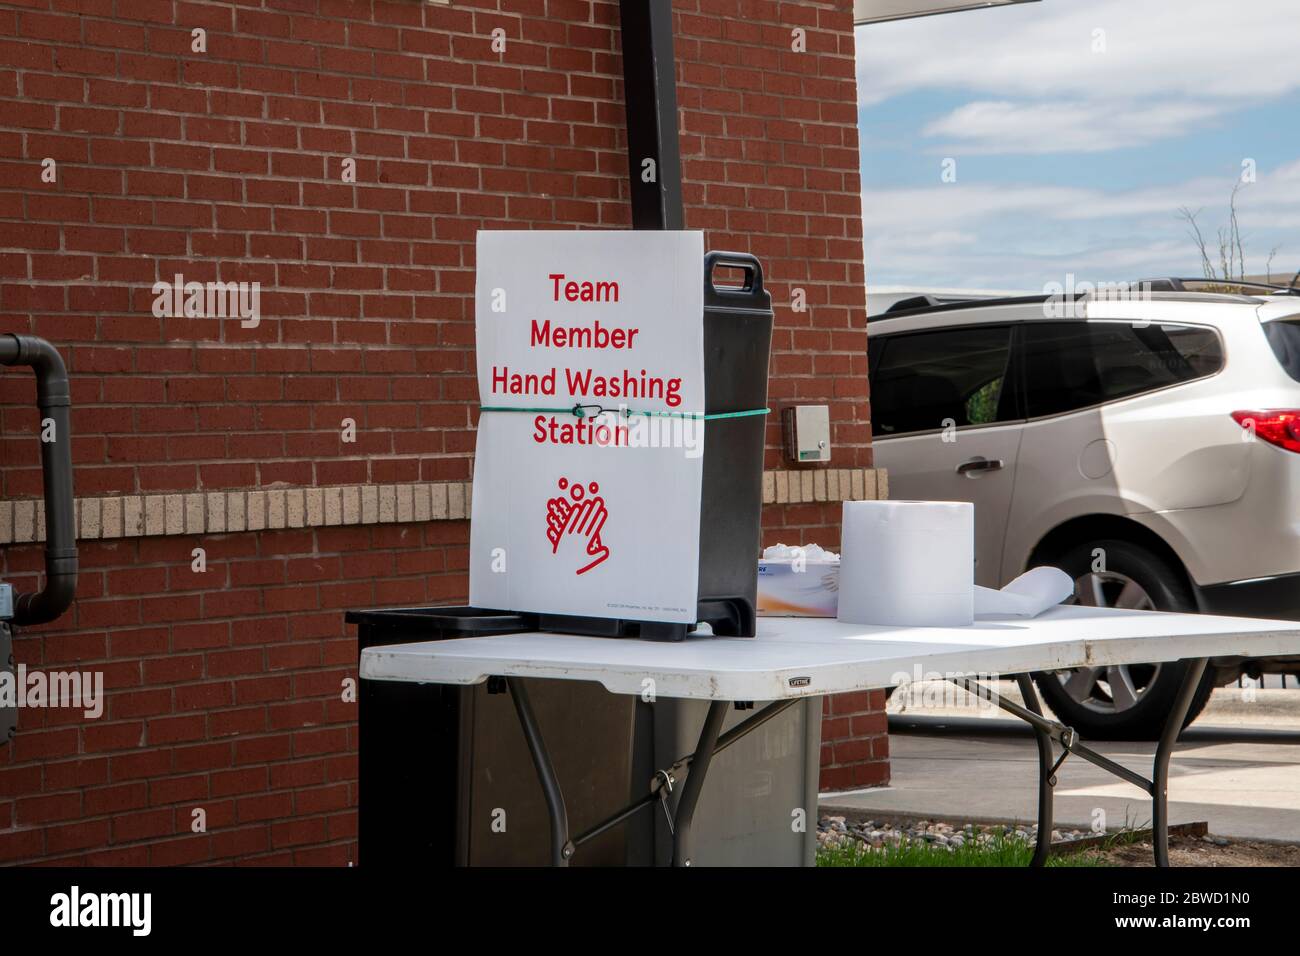 Maplewood, Minnesota. A team member hand washing station at a fast food restaurant for the employyes. Stock Photo